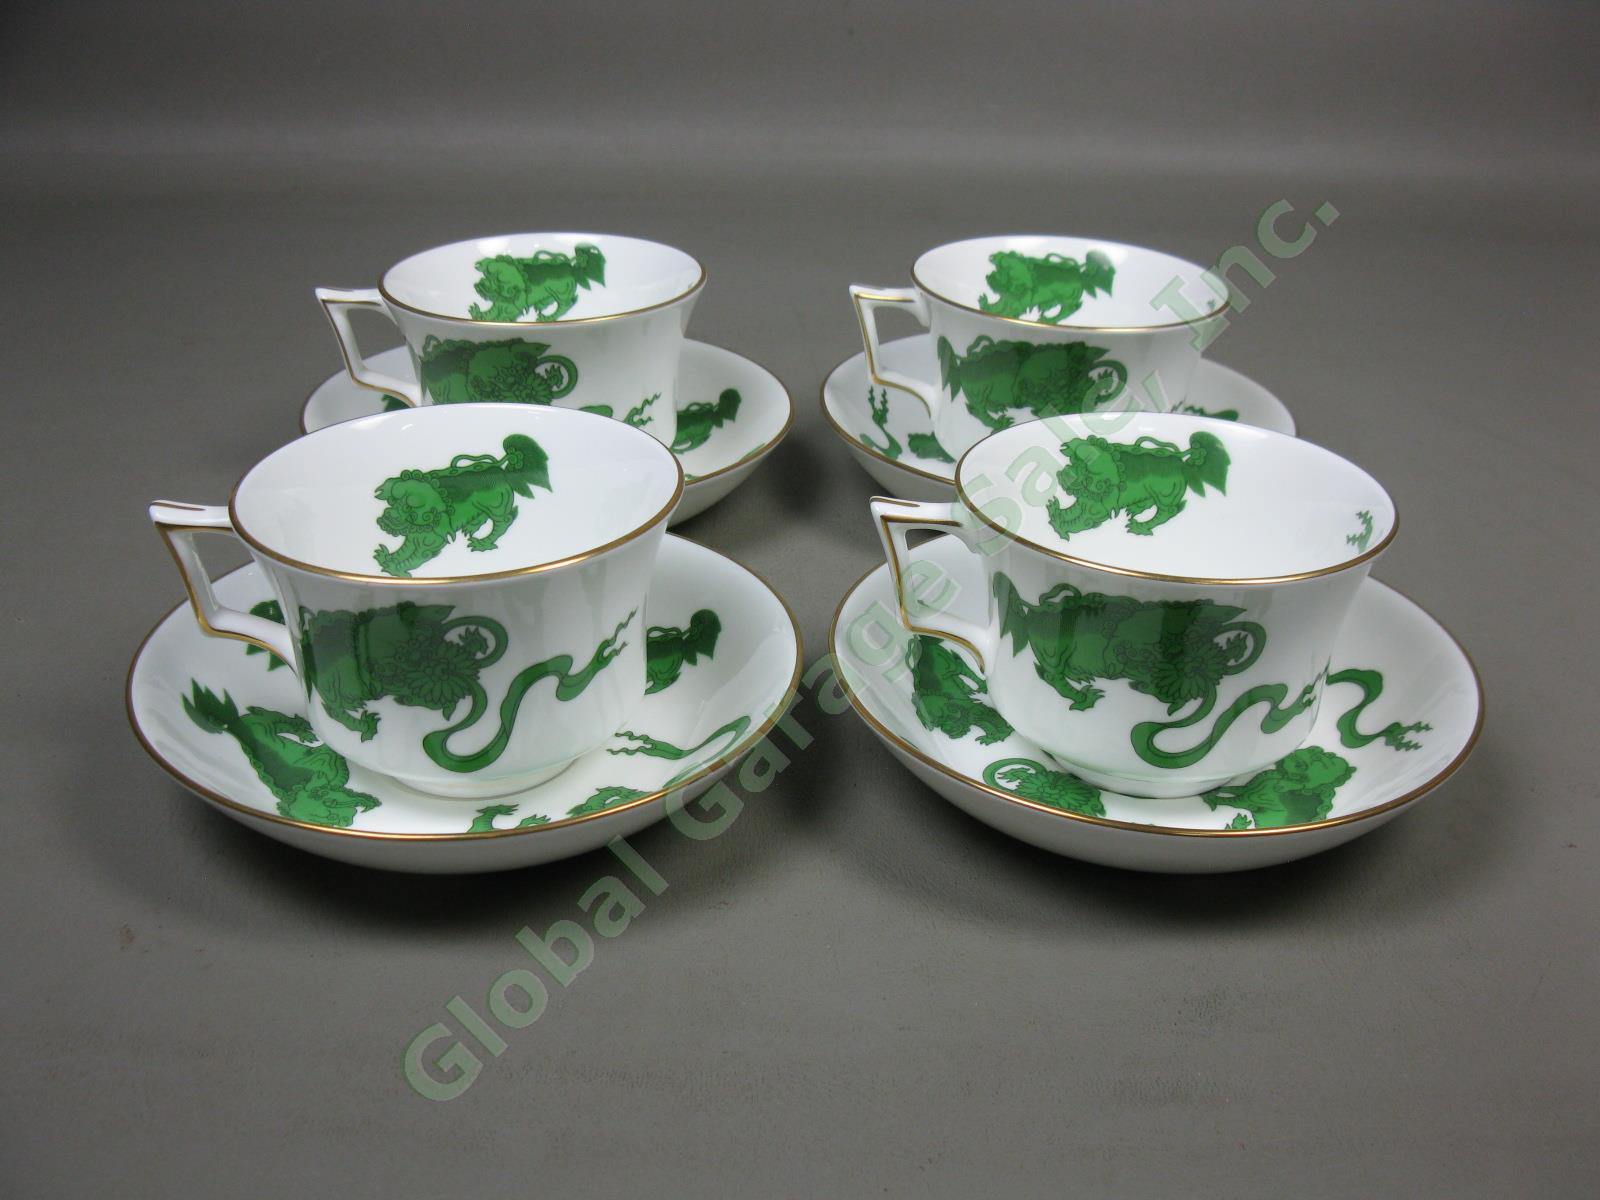 4 Wedgwood England Bone China Chinese Tigers Green Coffee Cups & Saucers Set Lot 1